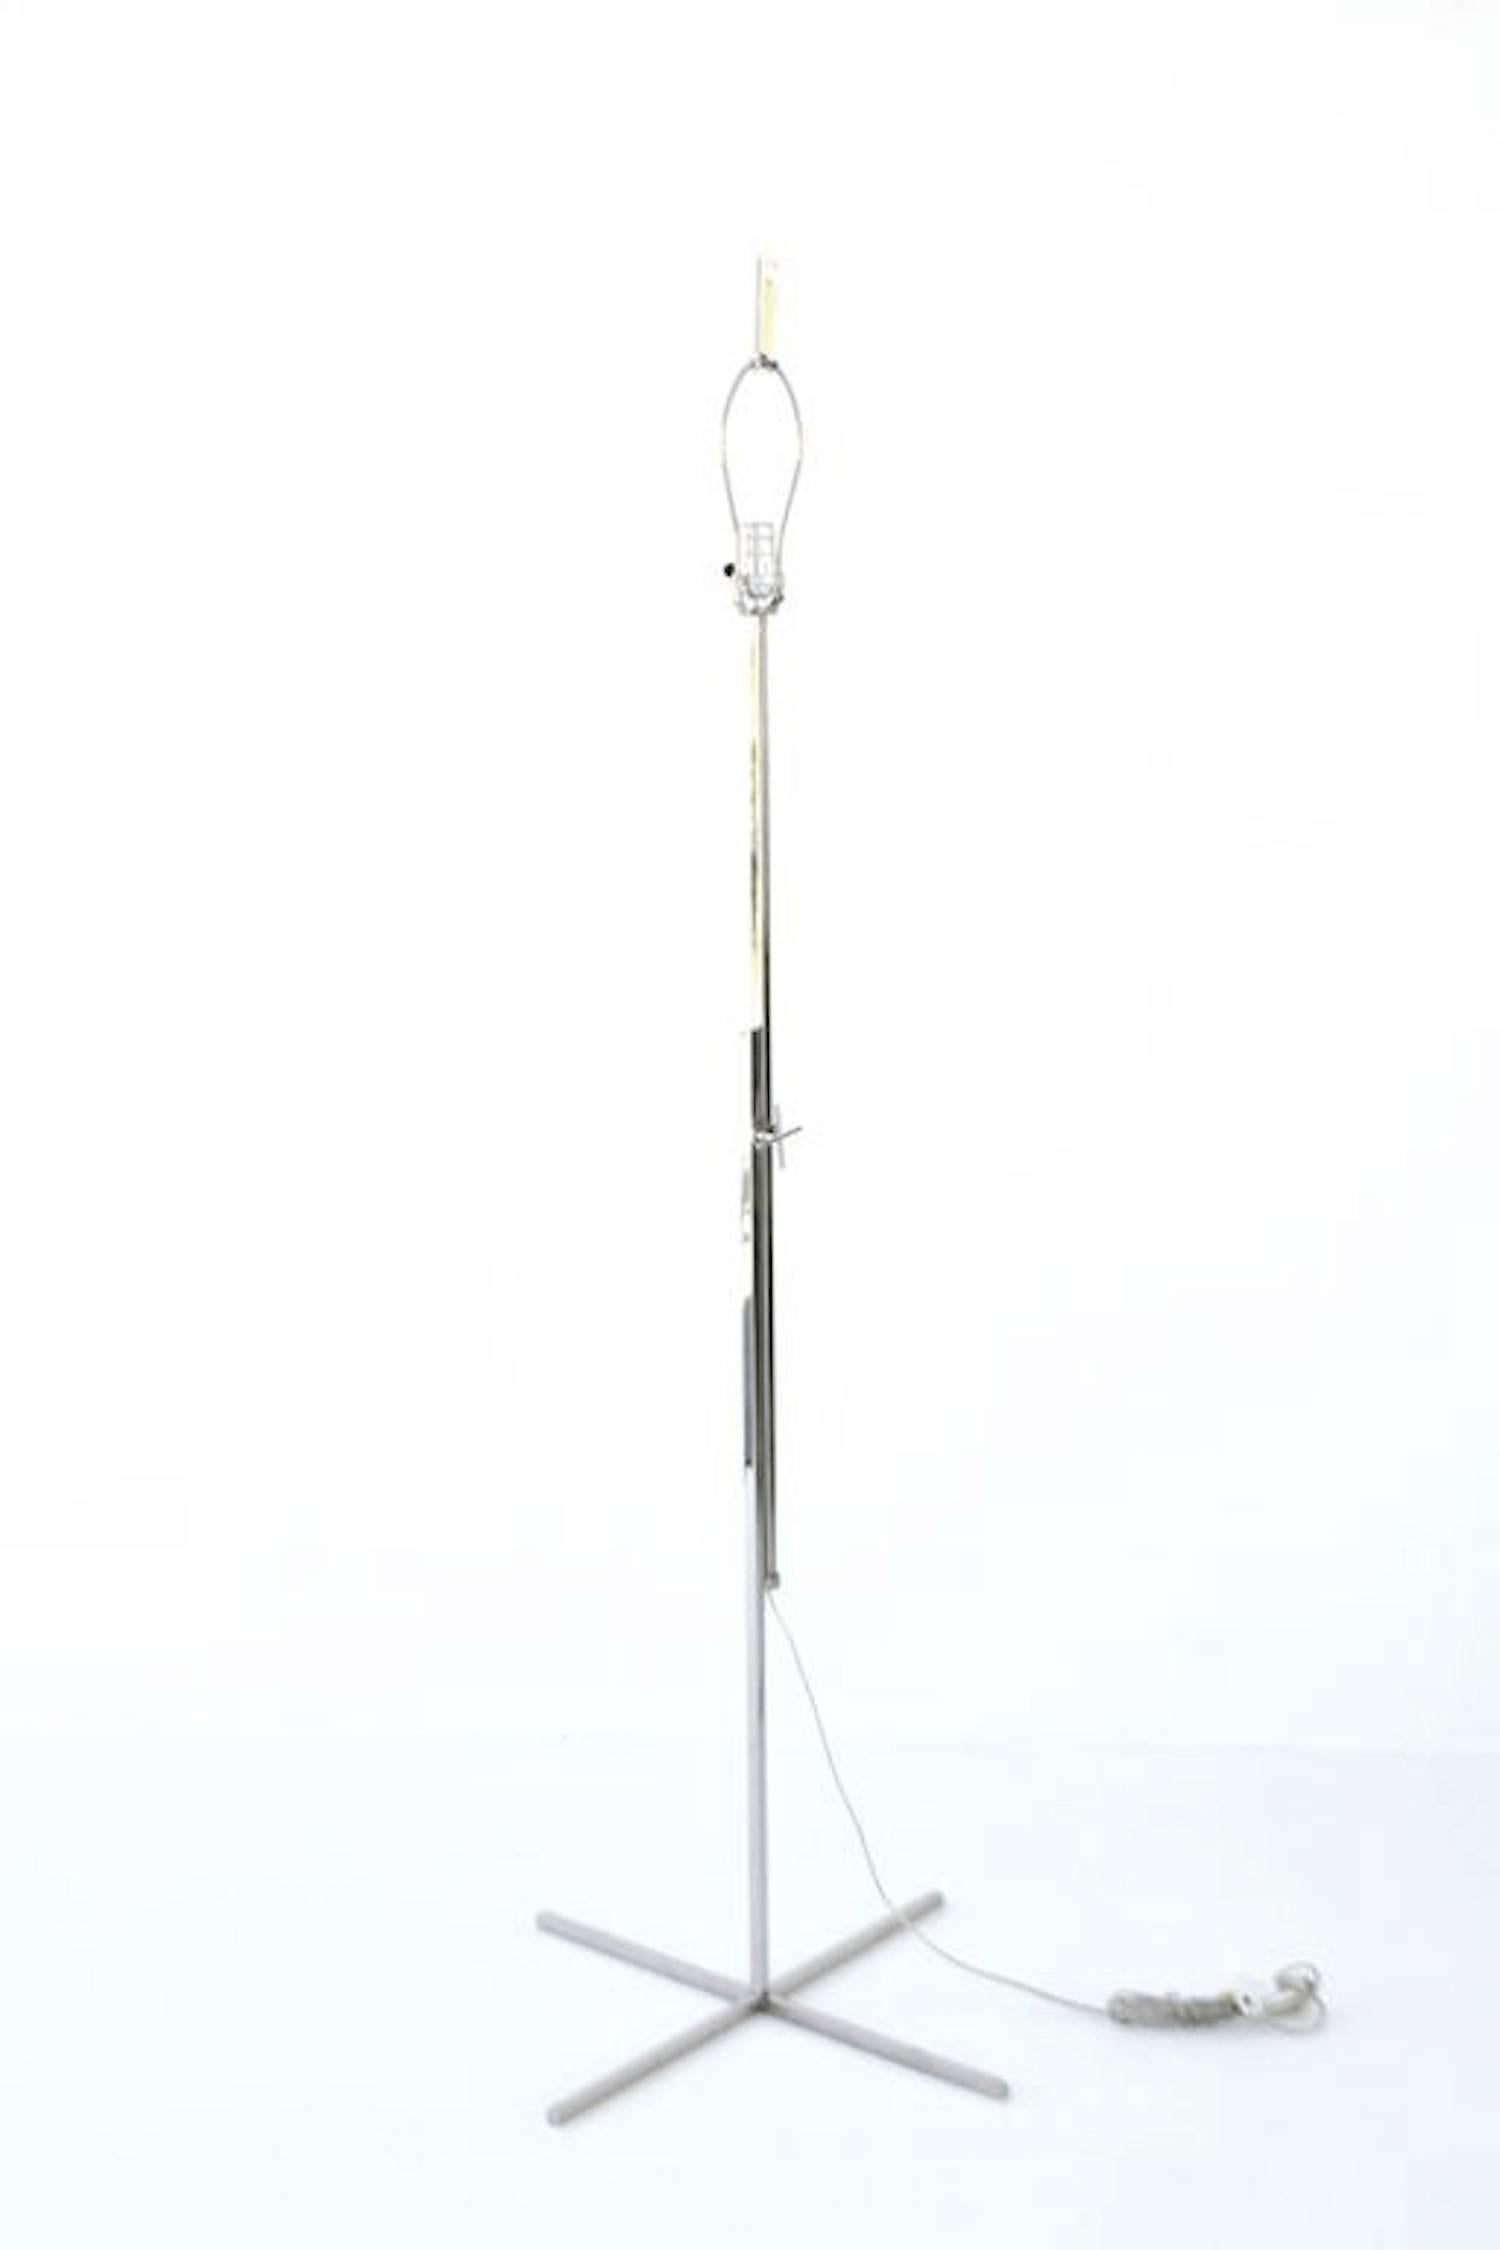 Striking Post-Modern adjustable height polished chrome cross base floor lamp, circa 1970s -1980s. This sculptural French custom crafted standing lamp is designed for adjustable heights. 
Shade not included.
Measurements:
Overall: 59